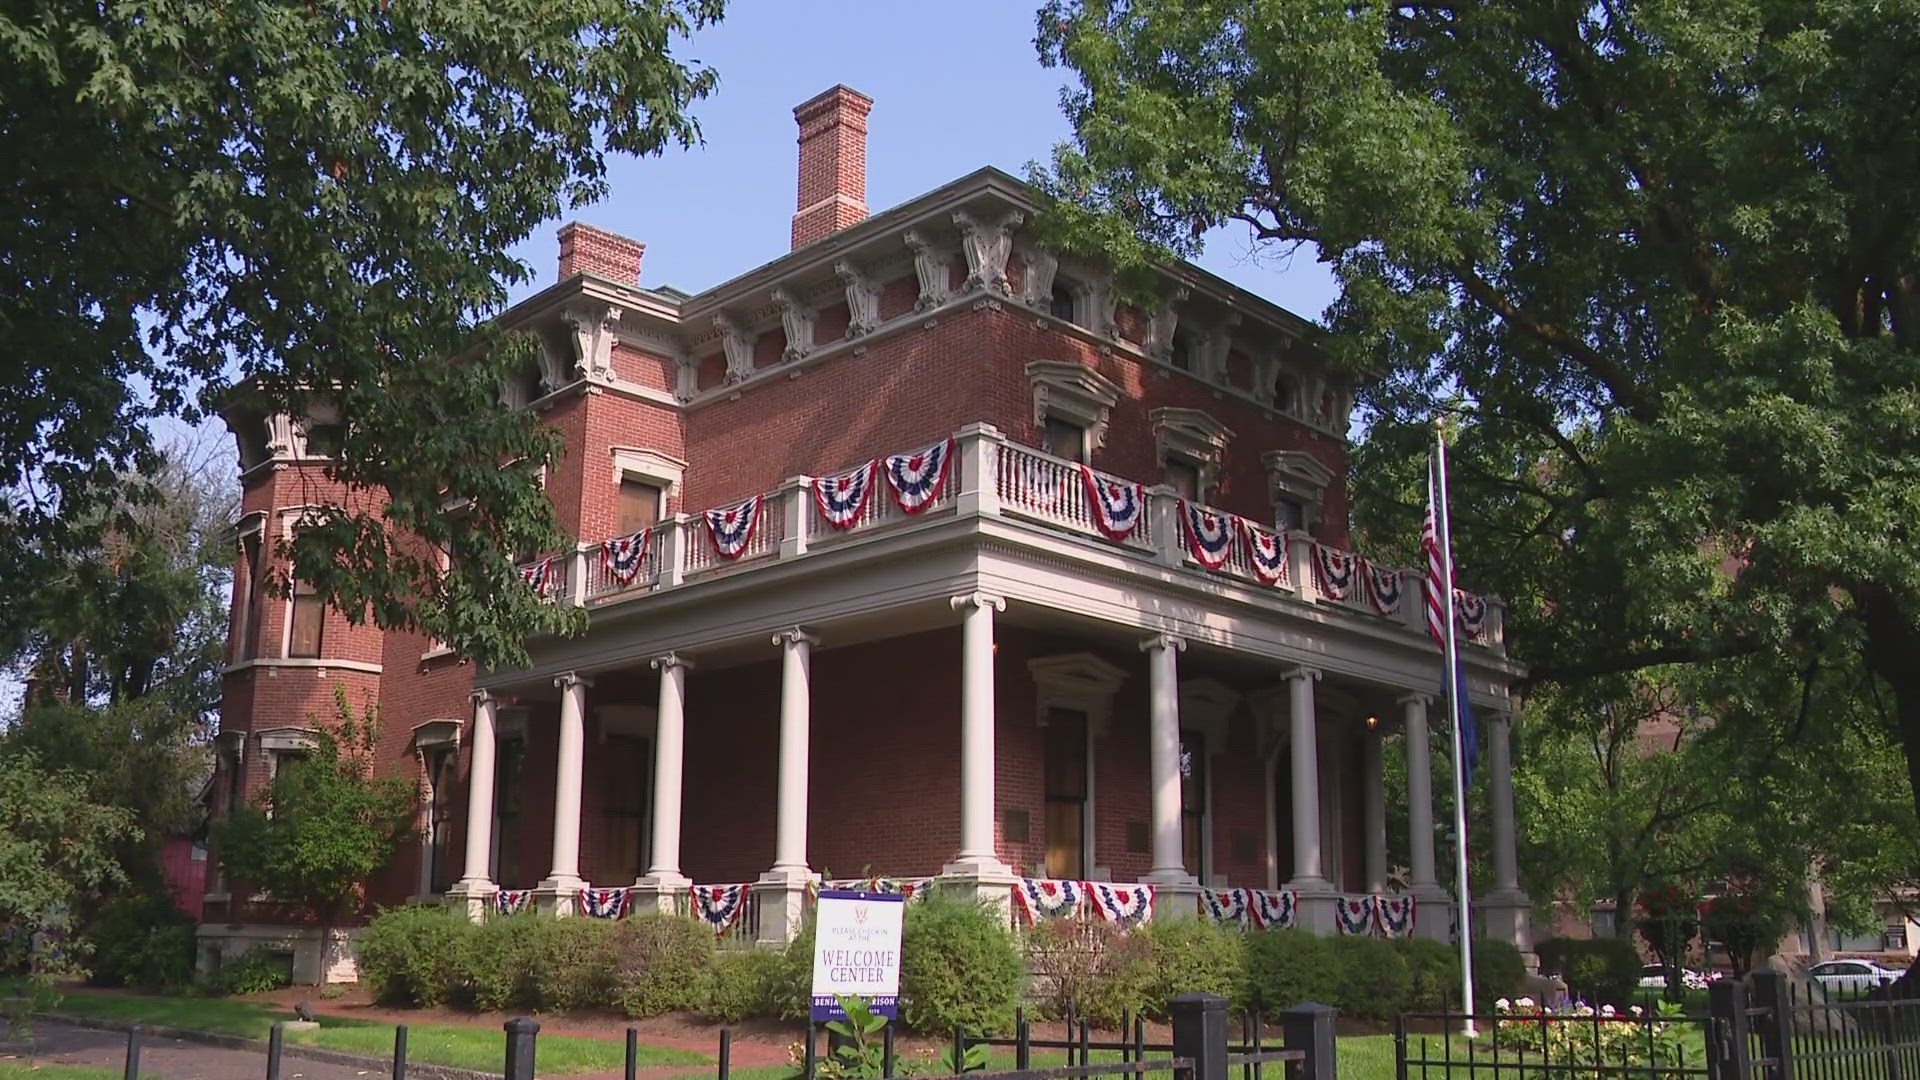 The Benjamin Harrison museum offered free tours for his birthday.